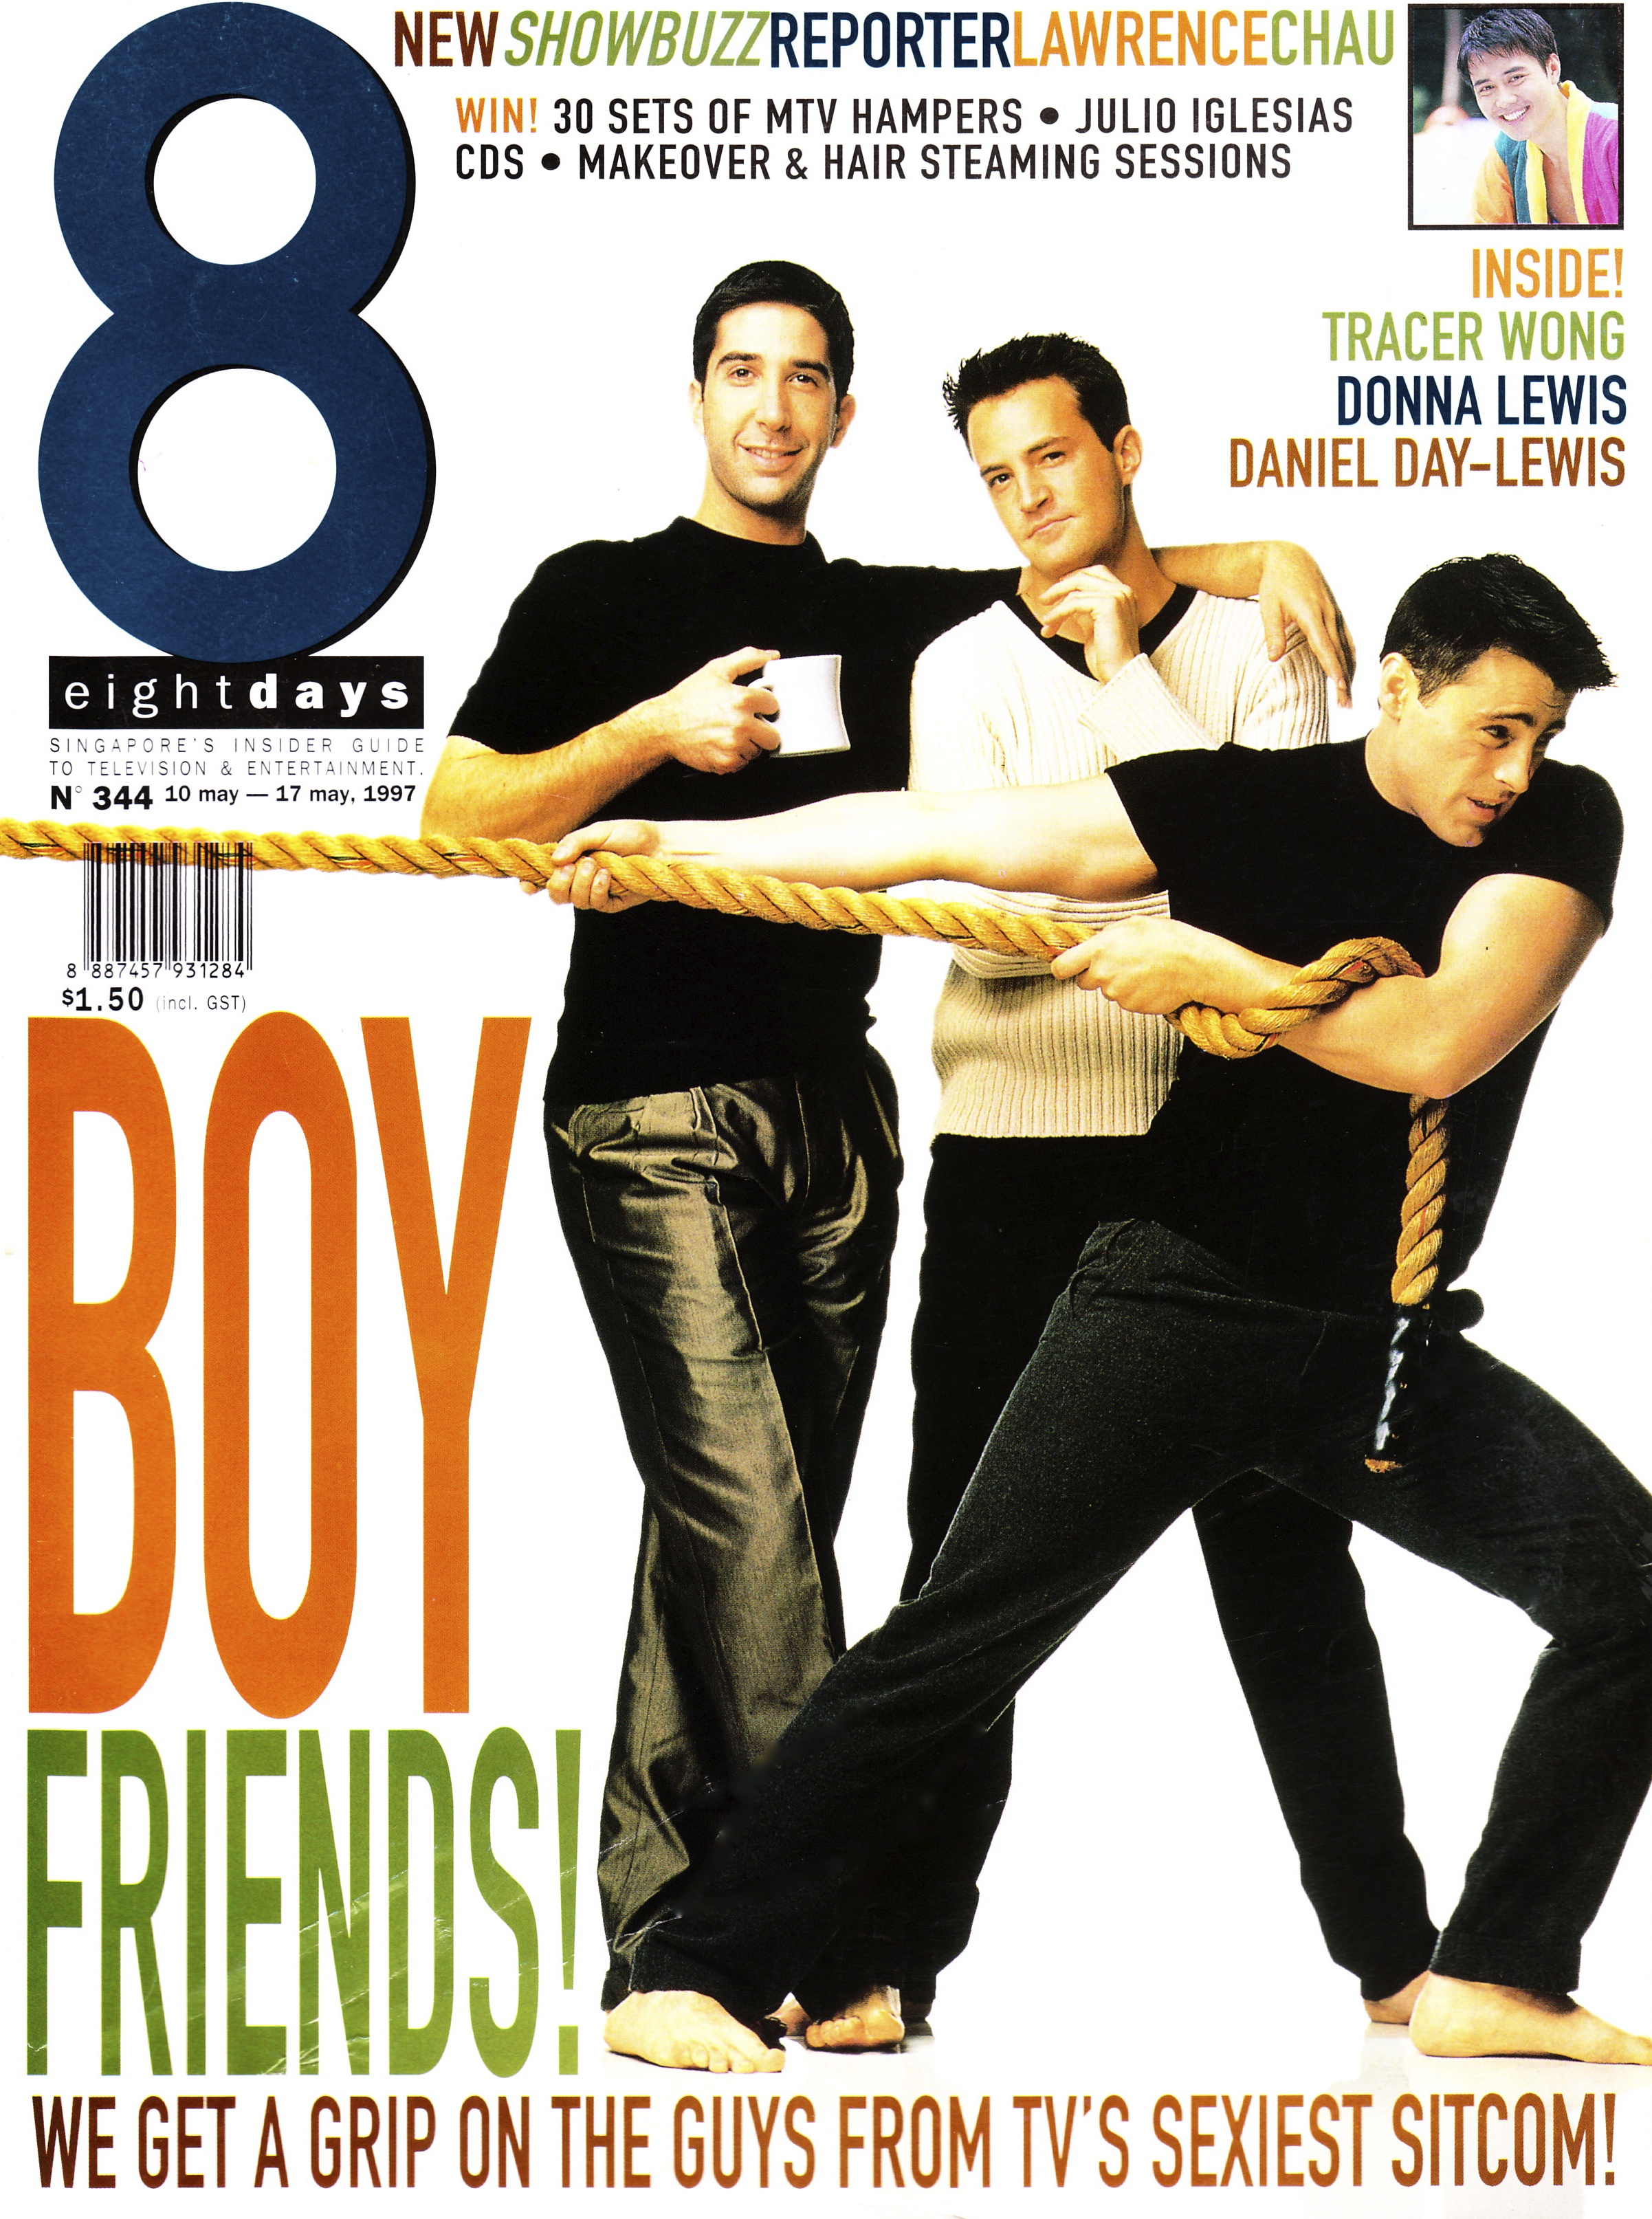 Not bad for a fresh start: Sharing the cover with the guys from Friends.